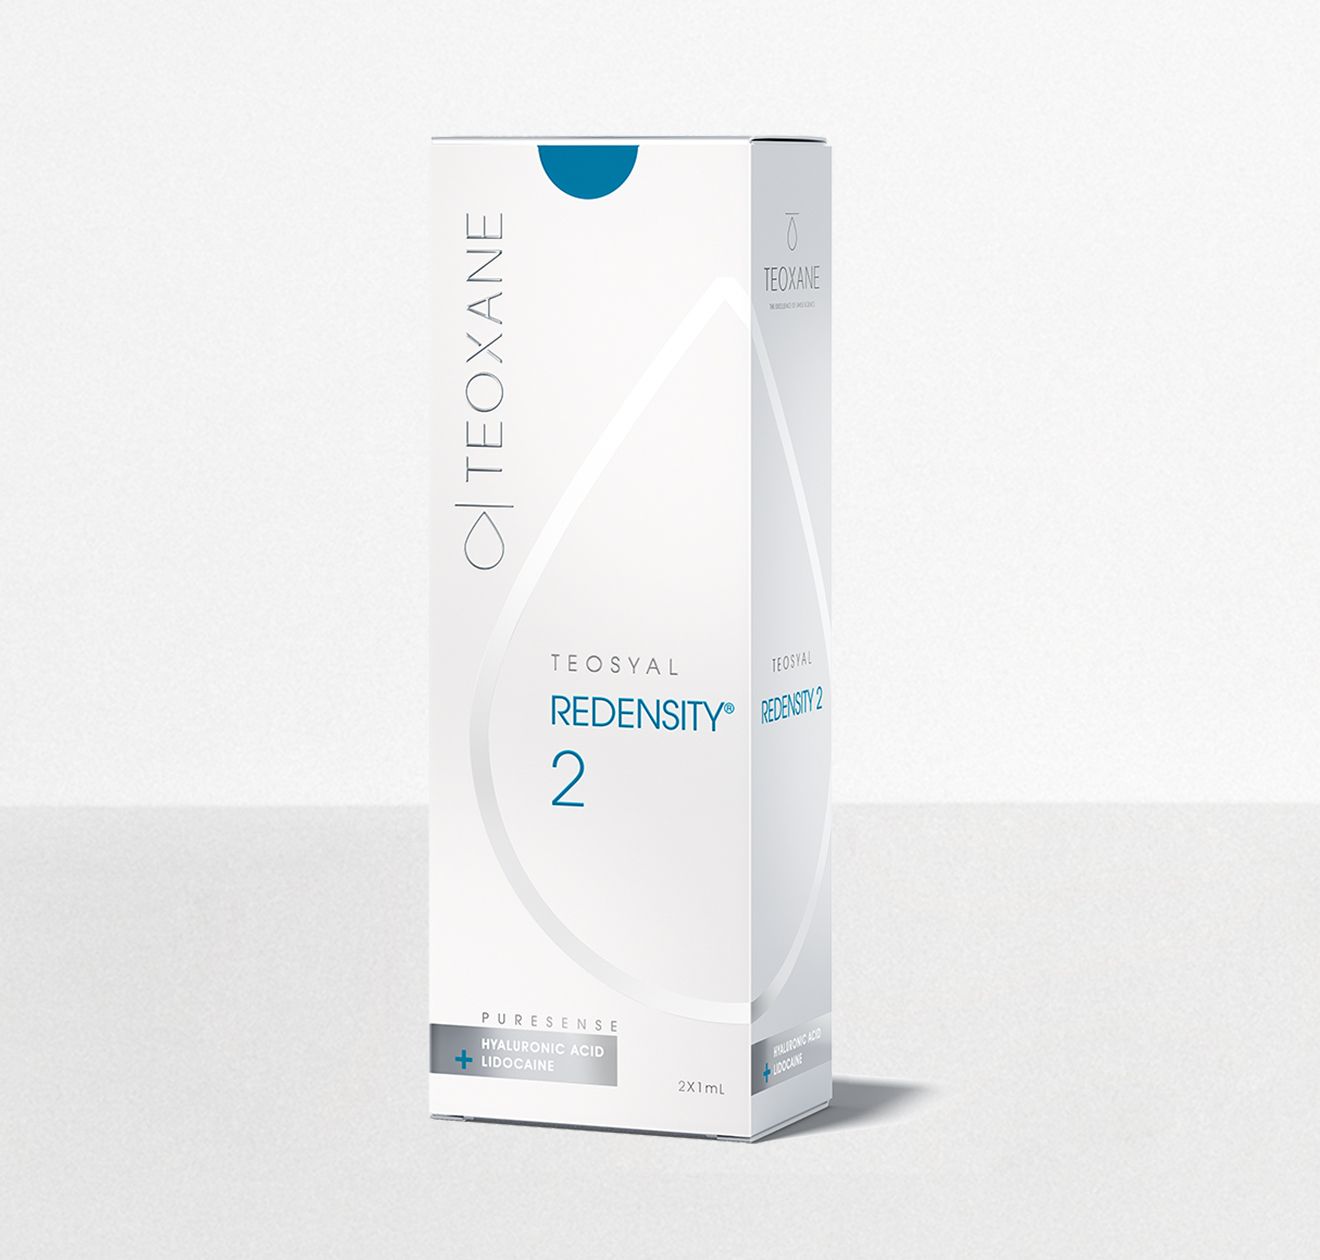 TEOSYAL® PURESENSE REDENSITY 2 1ST & ONLY HYALURONIC ACID GEL DESIGNED FOR UNDER EYE HOLLOWS